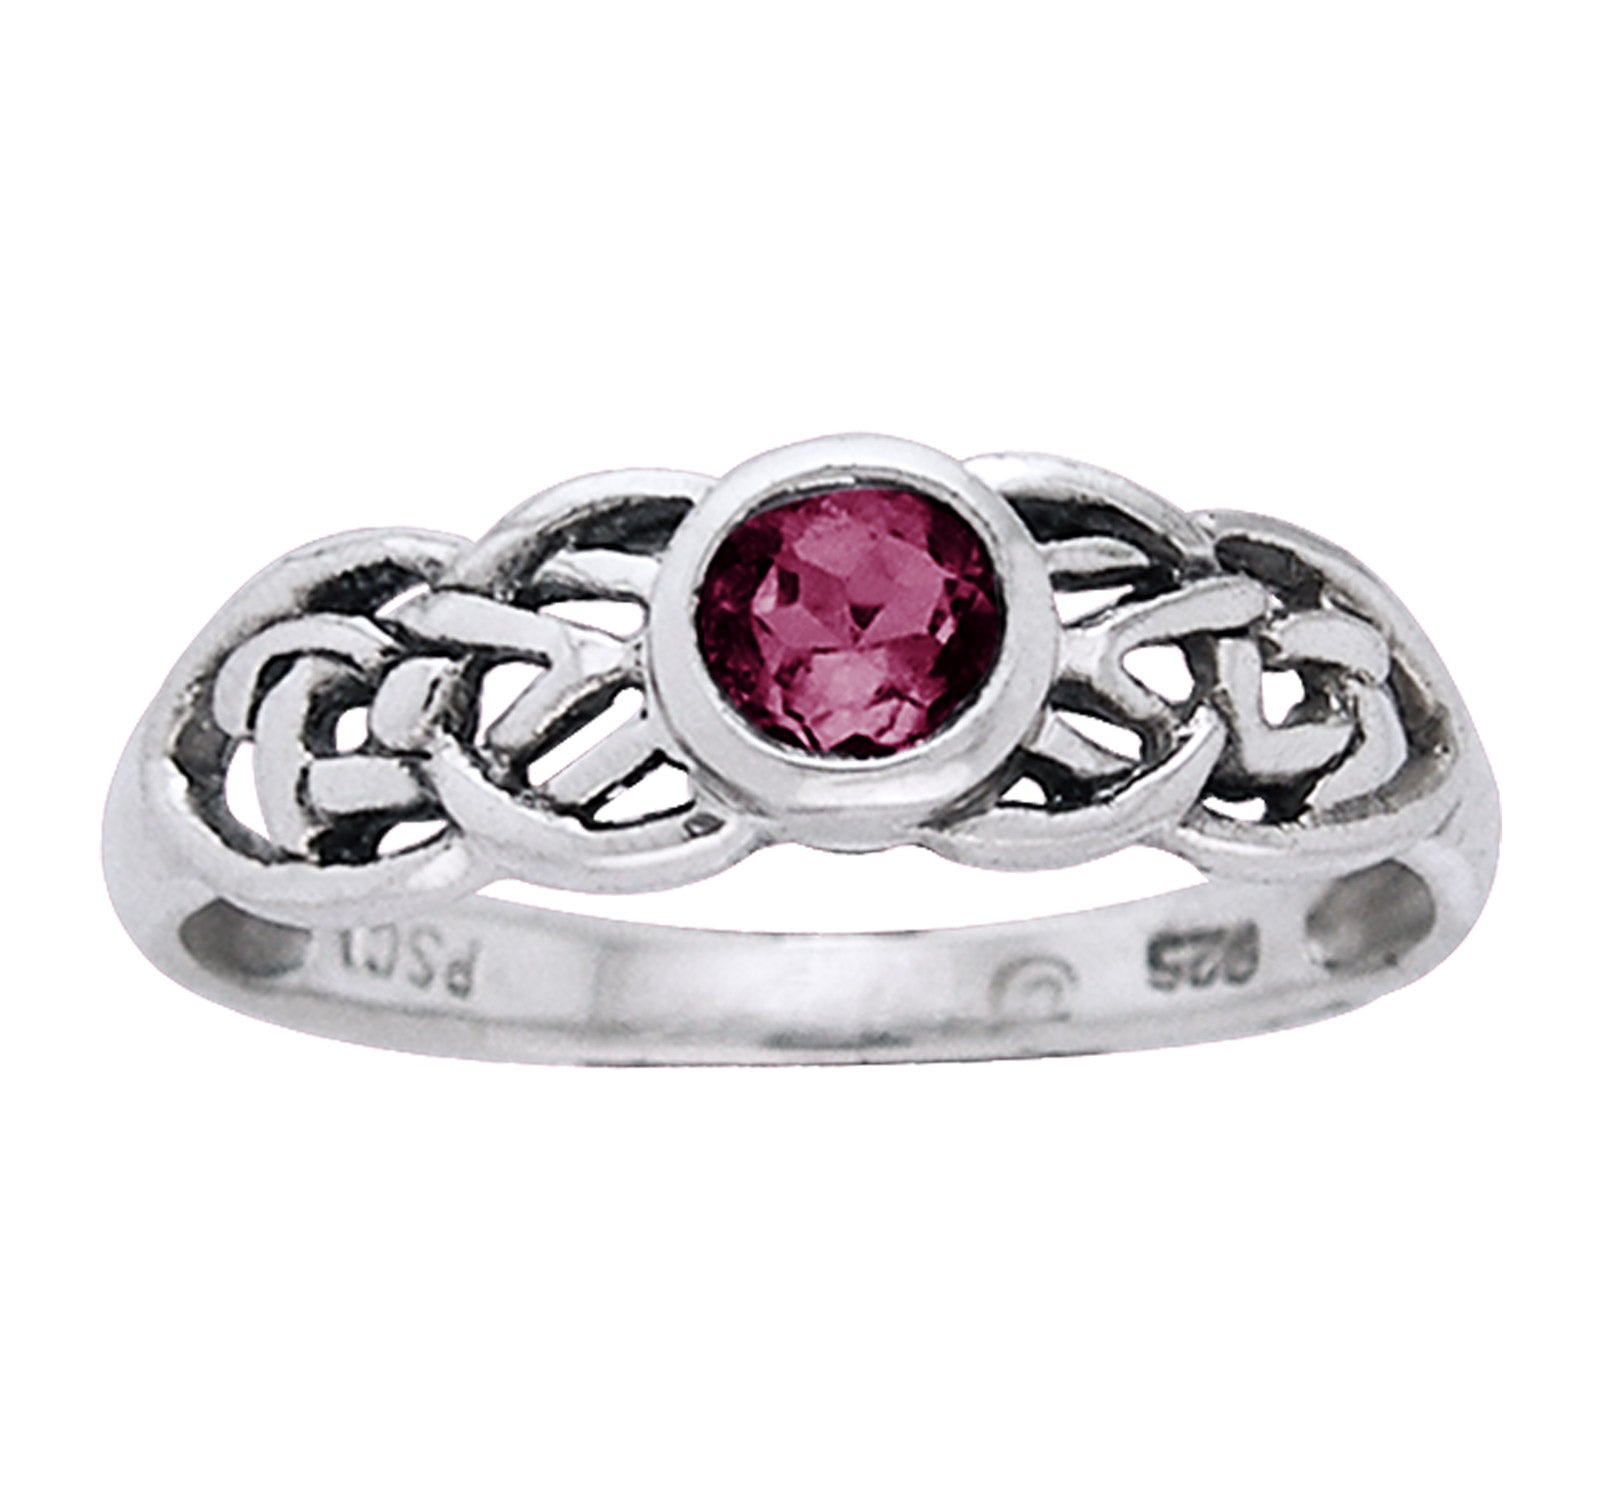 Petite Celtic Knot Birthstone Ring Sterling Silver Synthetic Ruby For July - Silver Insanity